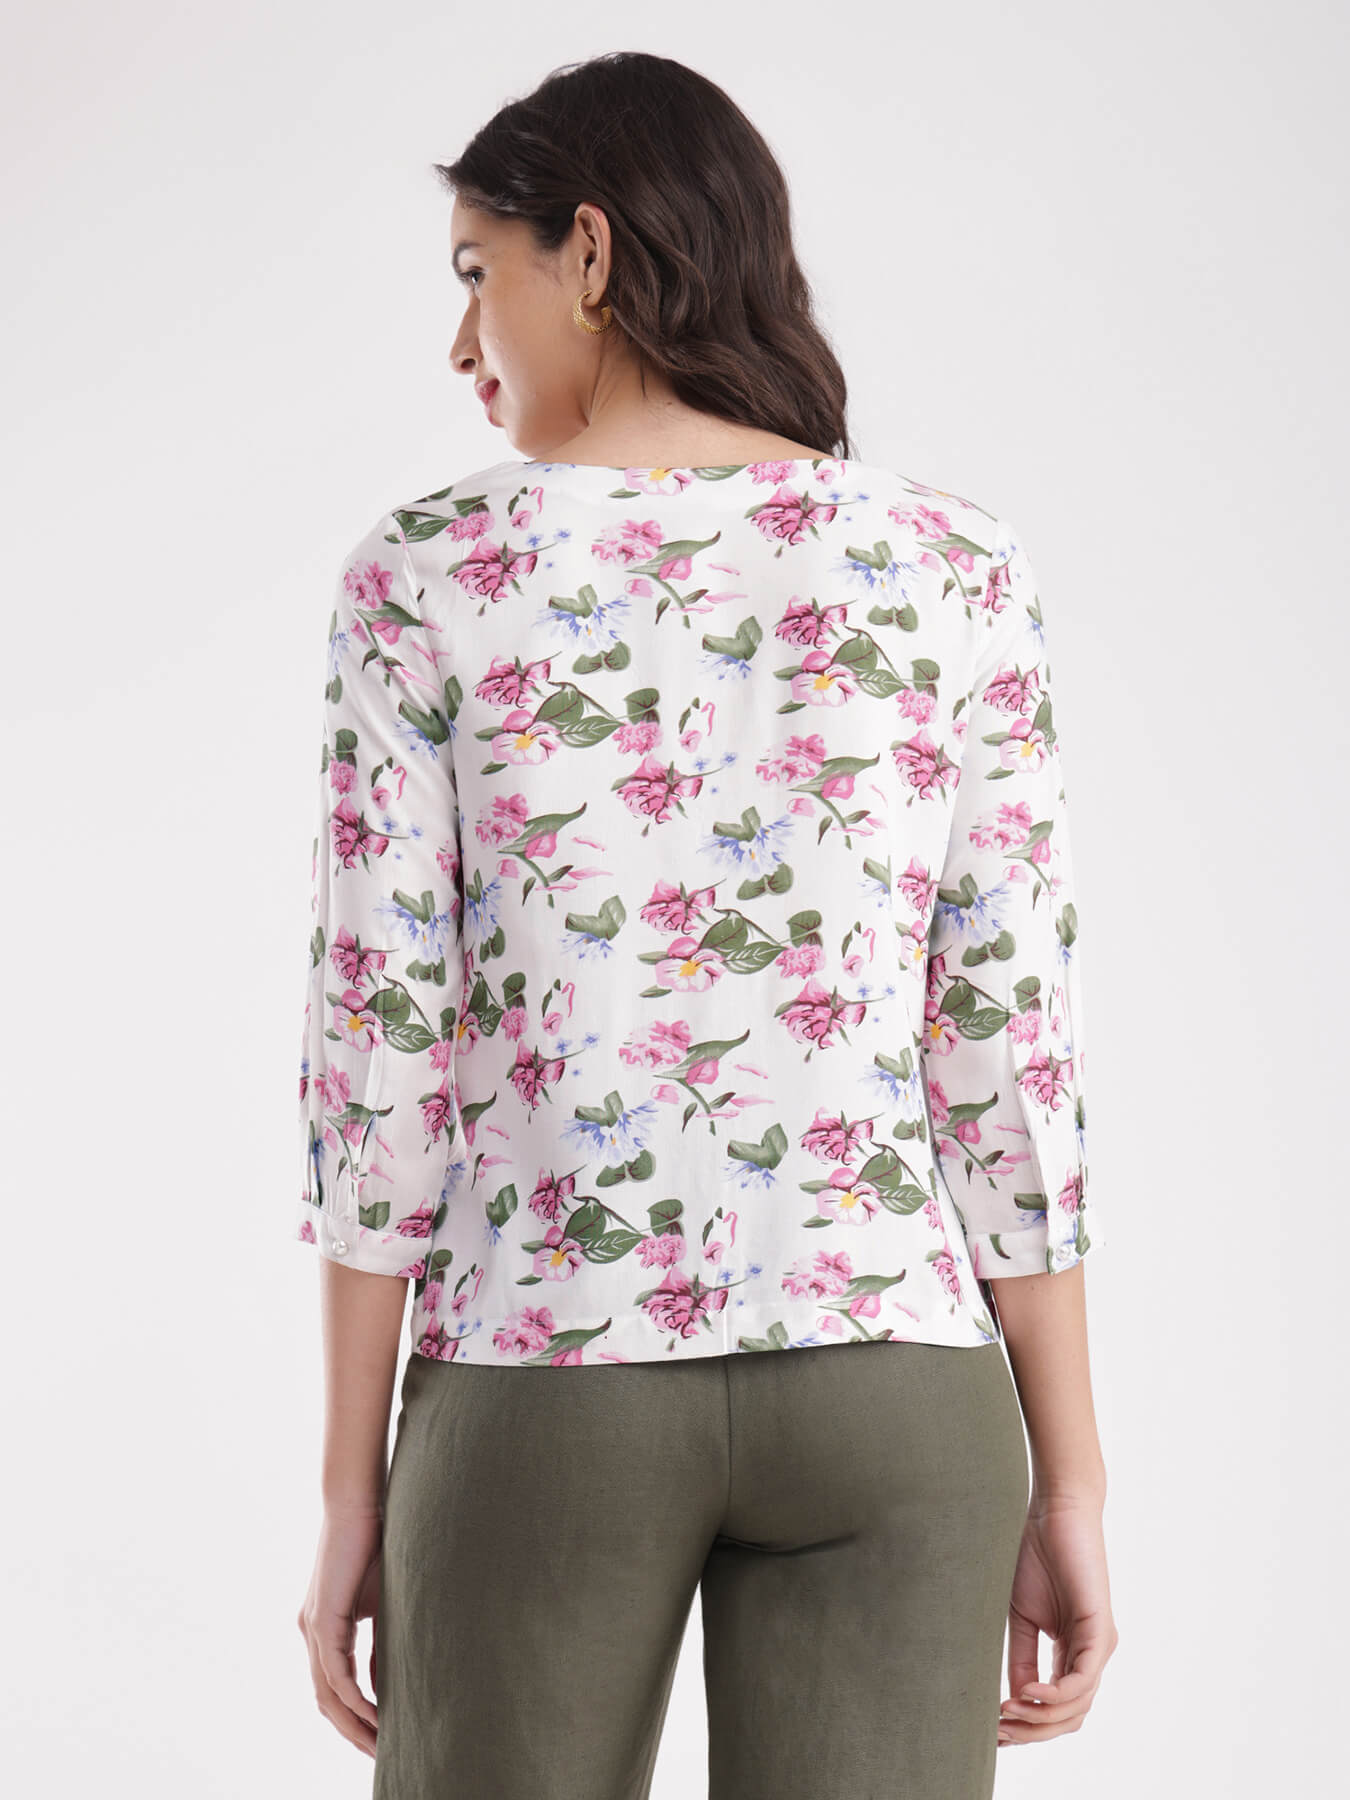 Floral Print V Neck Top - White And Pink